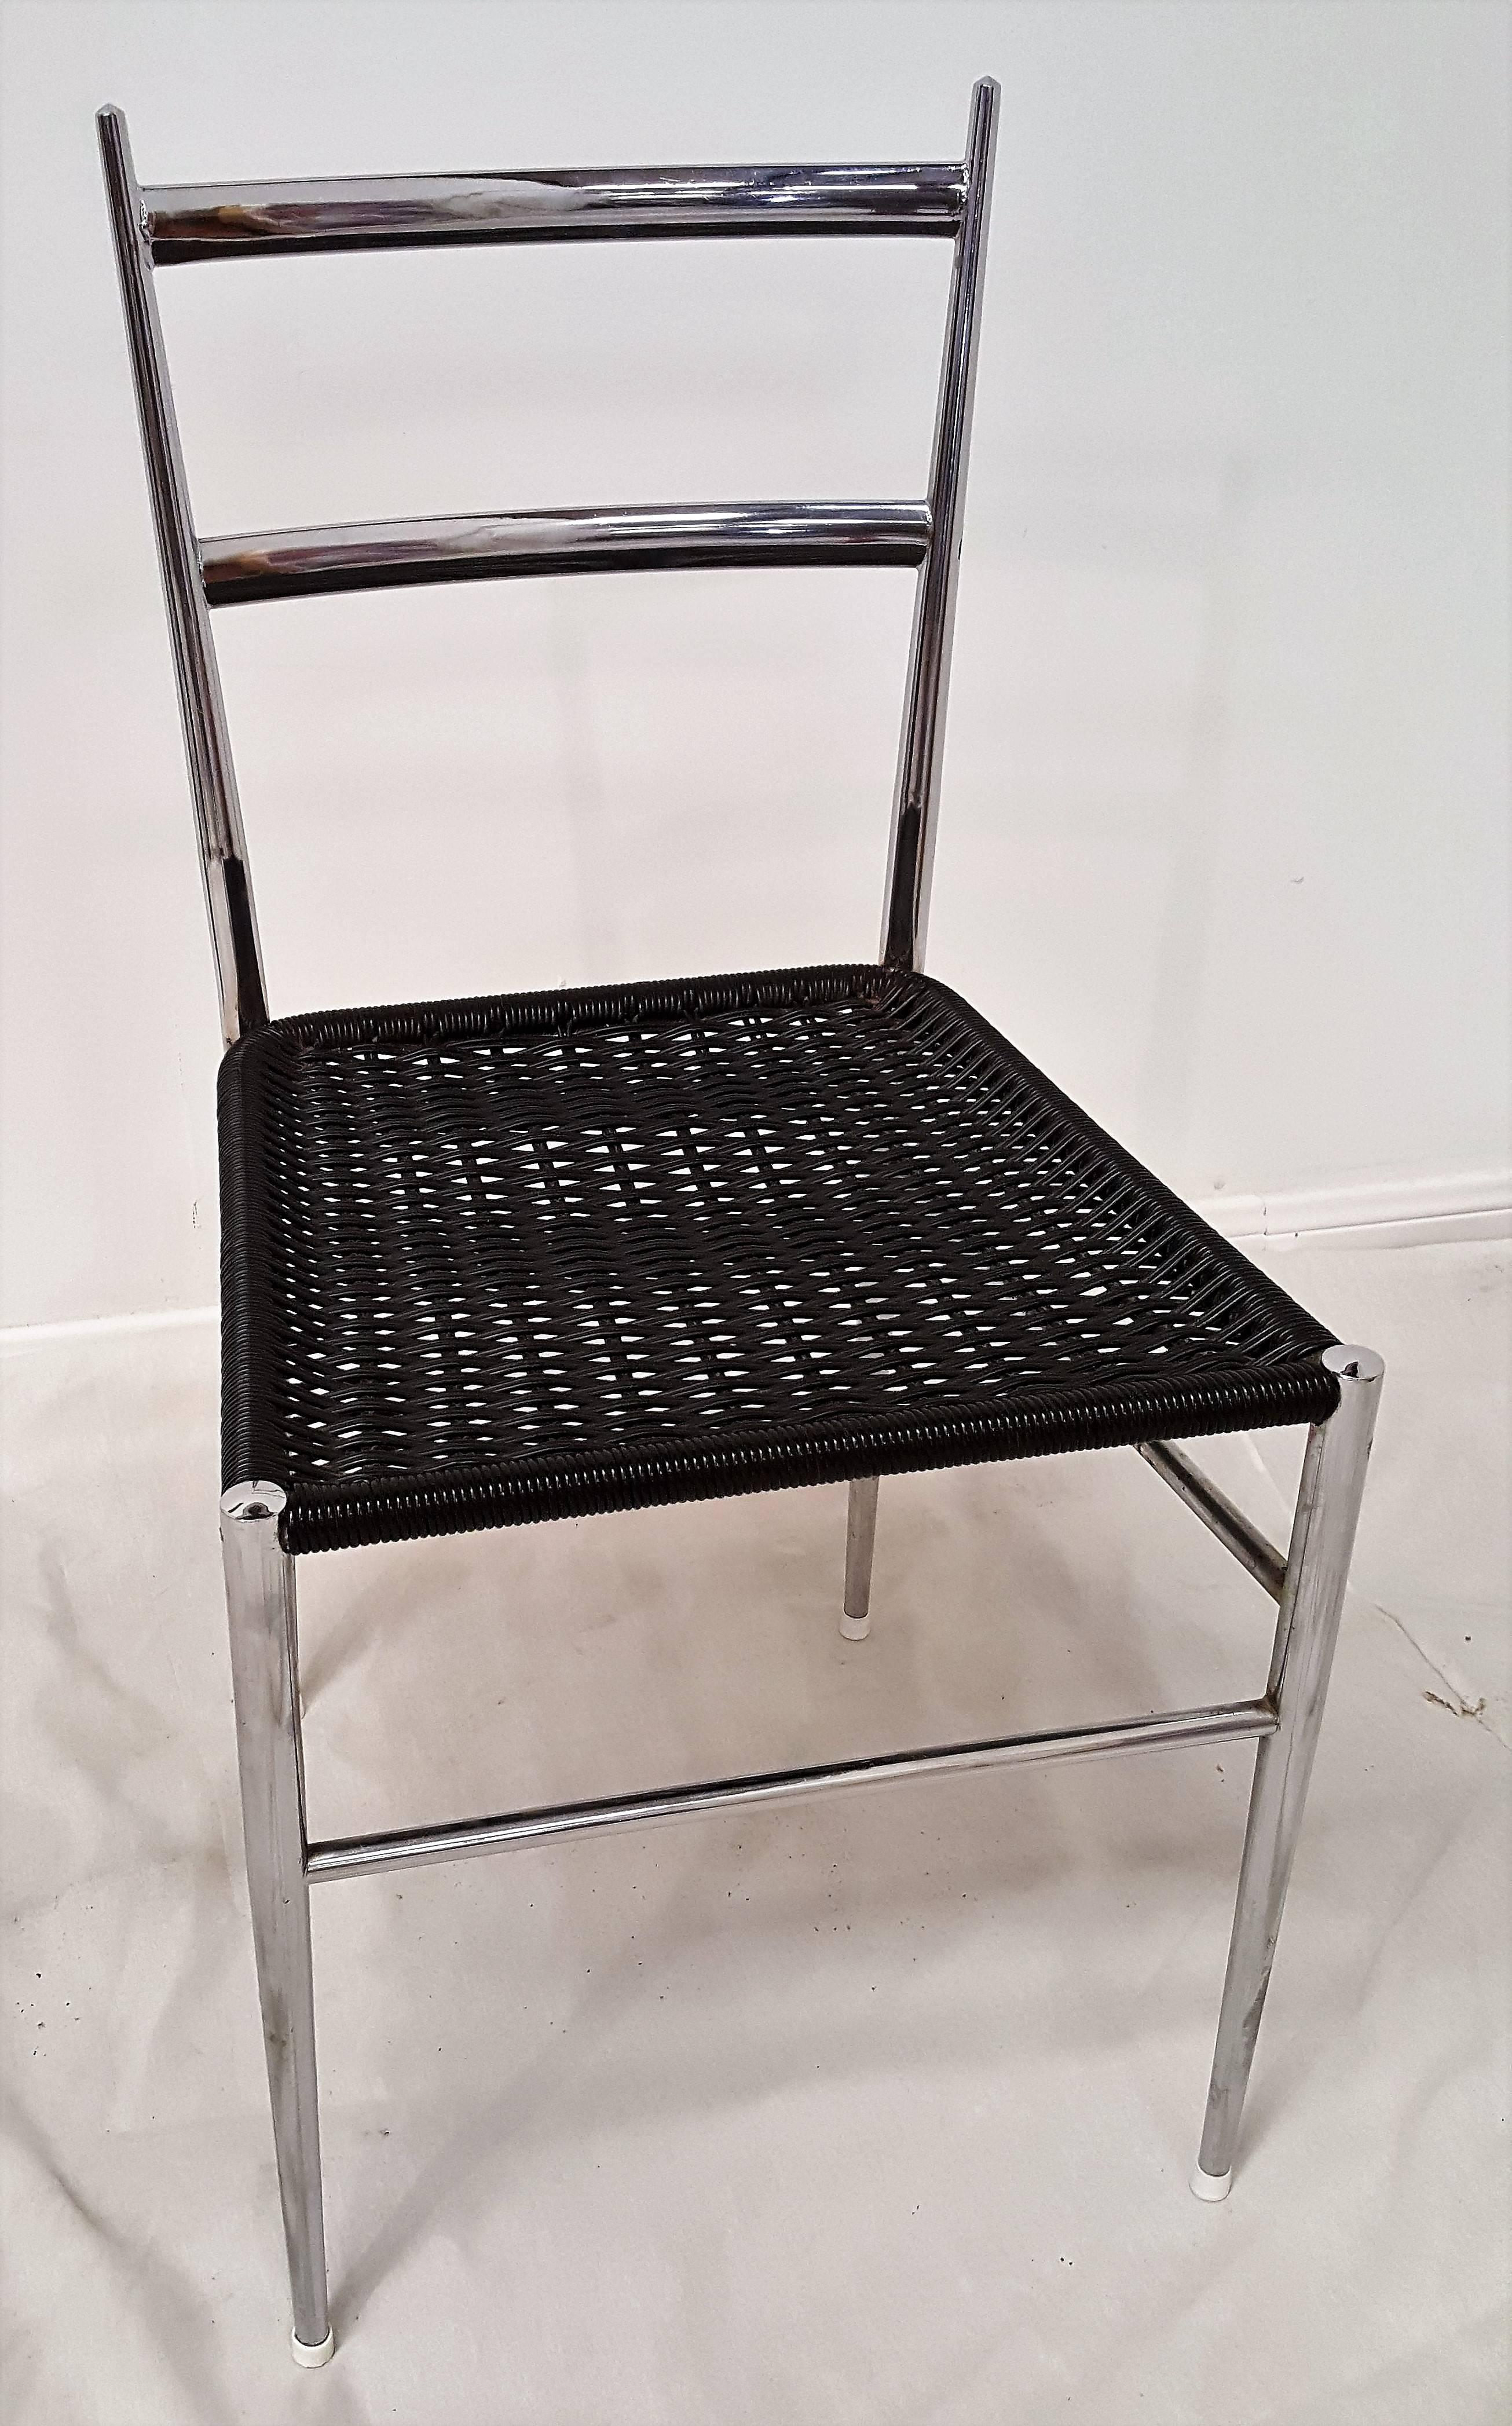 Super cool and super Mid-Century set of Gio Ponti style chrome chairs named the Superleggera or Super-light. The chair is strong but light enough it may be lifted by a child using just one finger. This group has the highly polished chrome with black